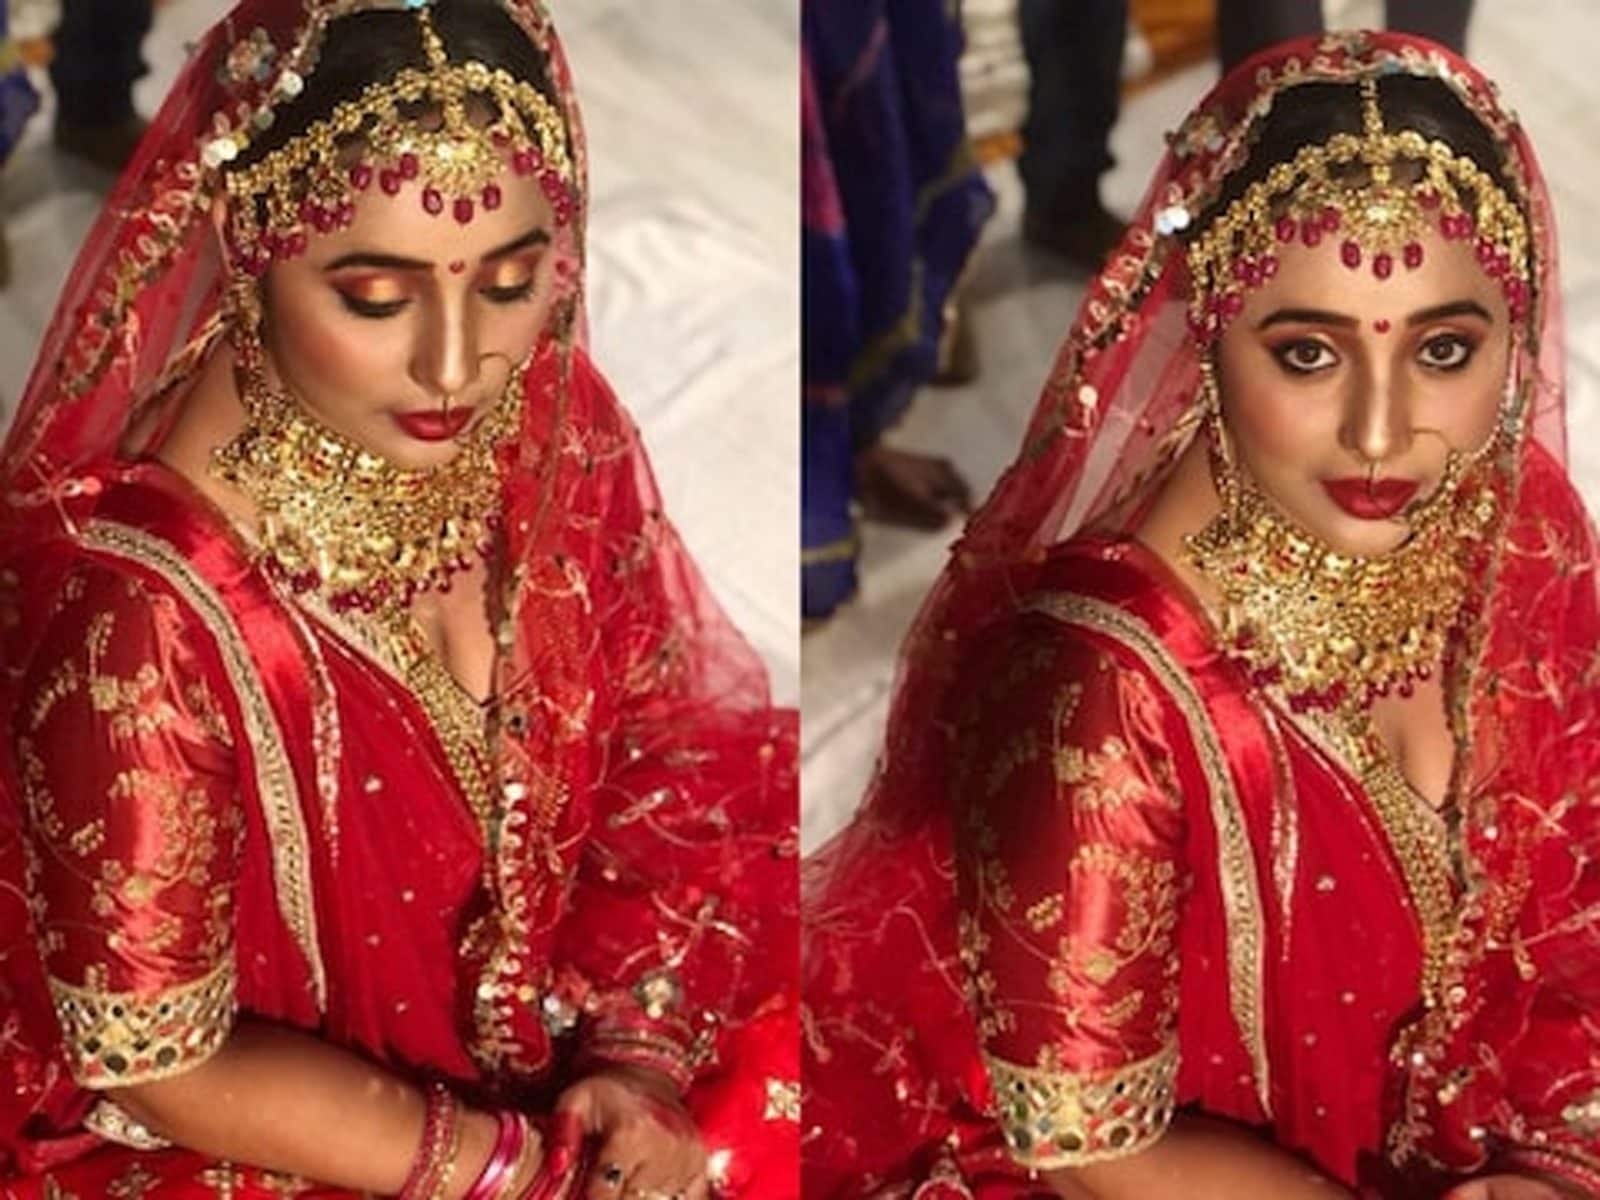 Rani Chatterjee Ka Xxx Video - Rani Chatterjee Shares Her Bridal Look From Her Upcoming Movie, Fans Go Wow  - News18